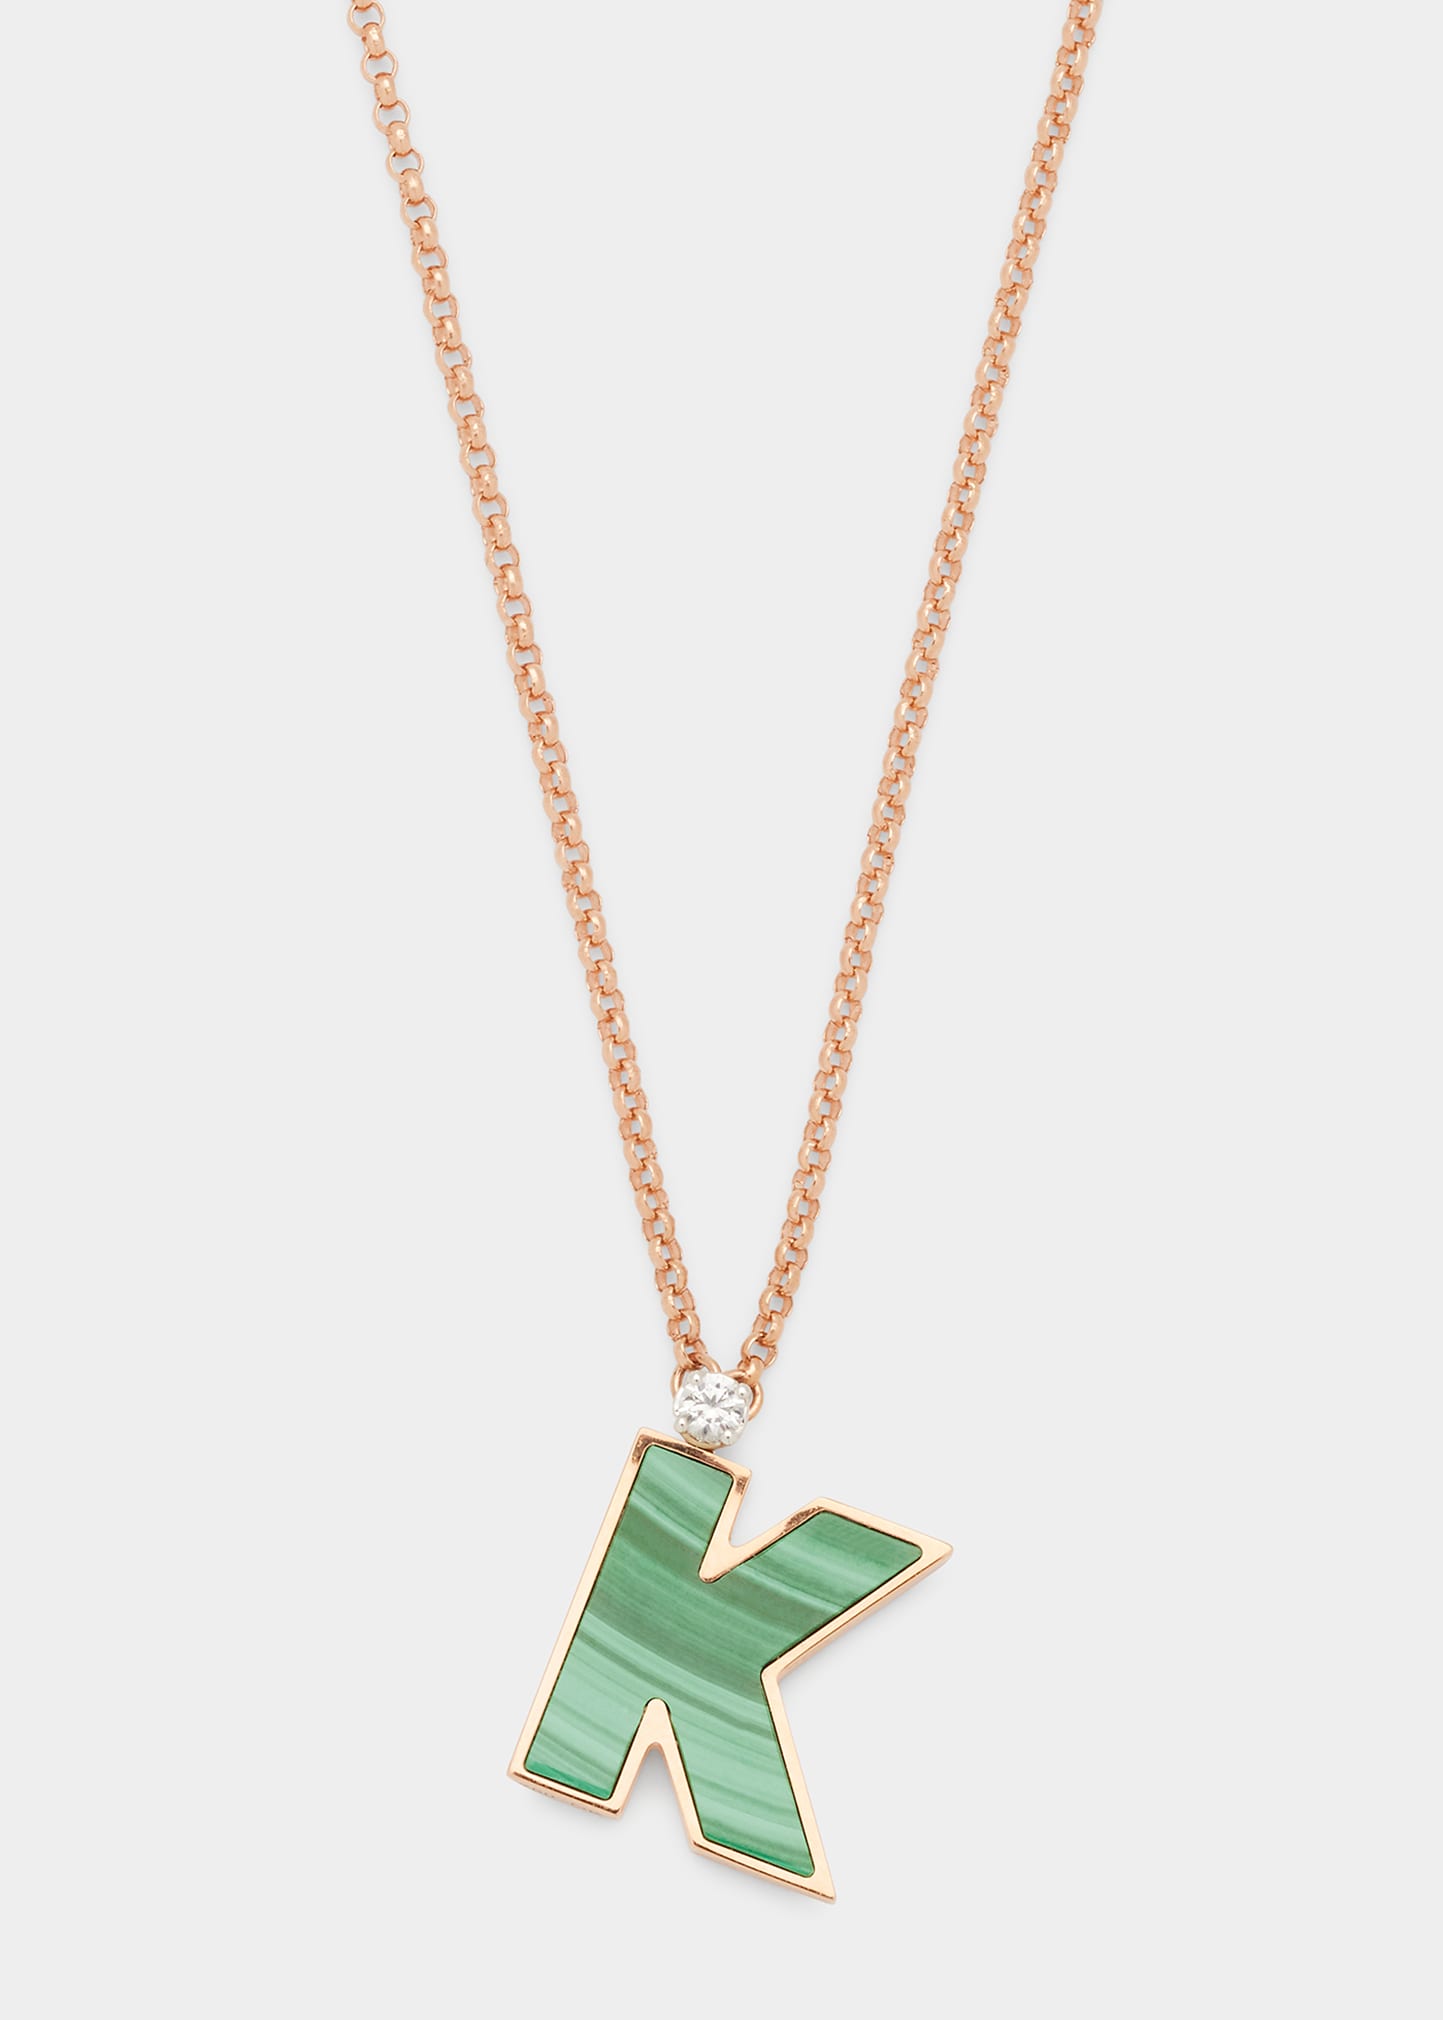 Rose Gold 'K' Letter Charm Necklace with Malachite and White Sapphire